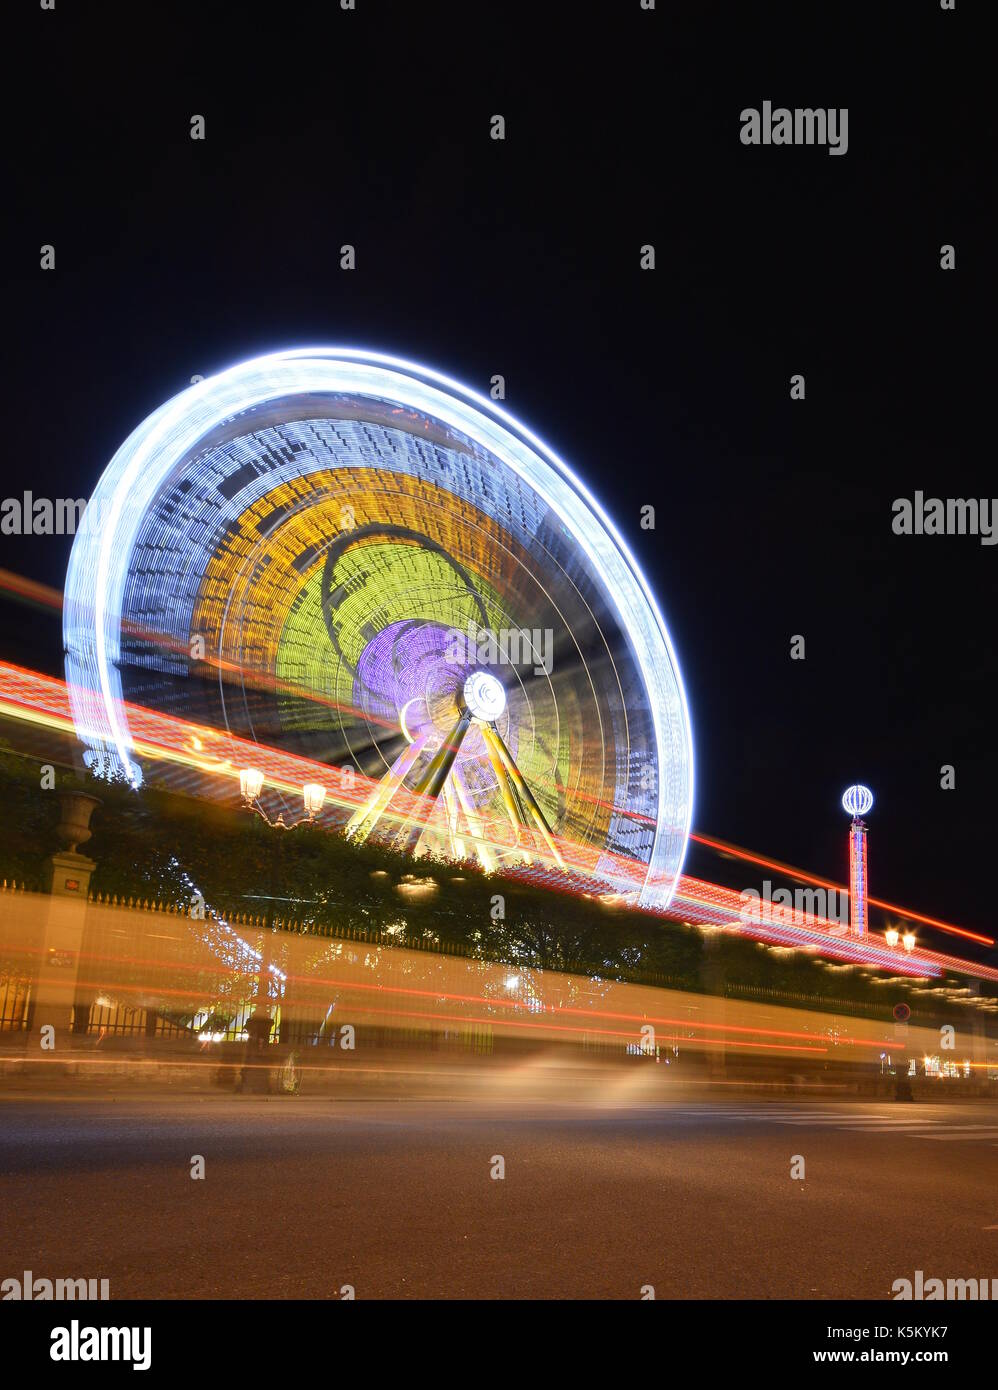 Ferris Wheel long exposure with car light trails Stock Photo